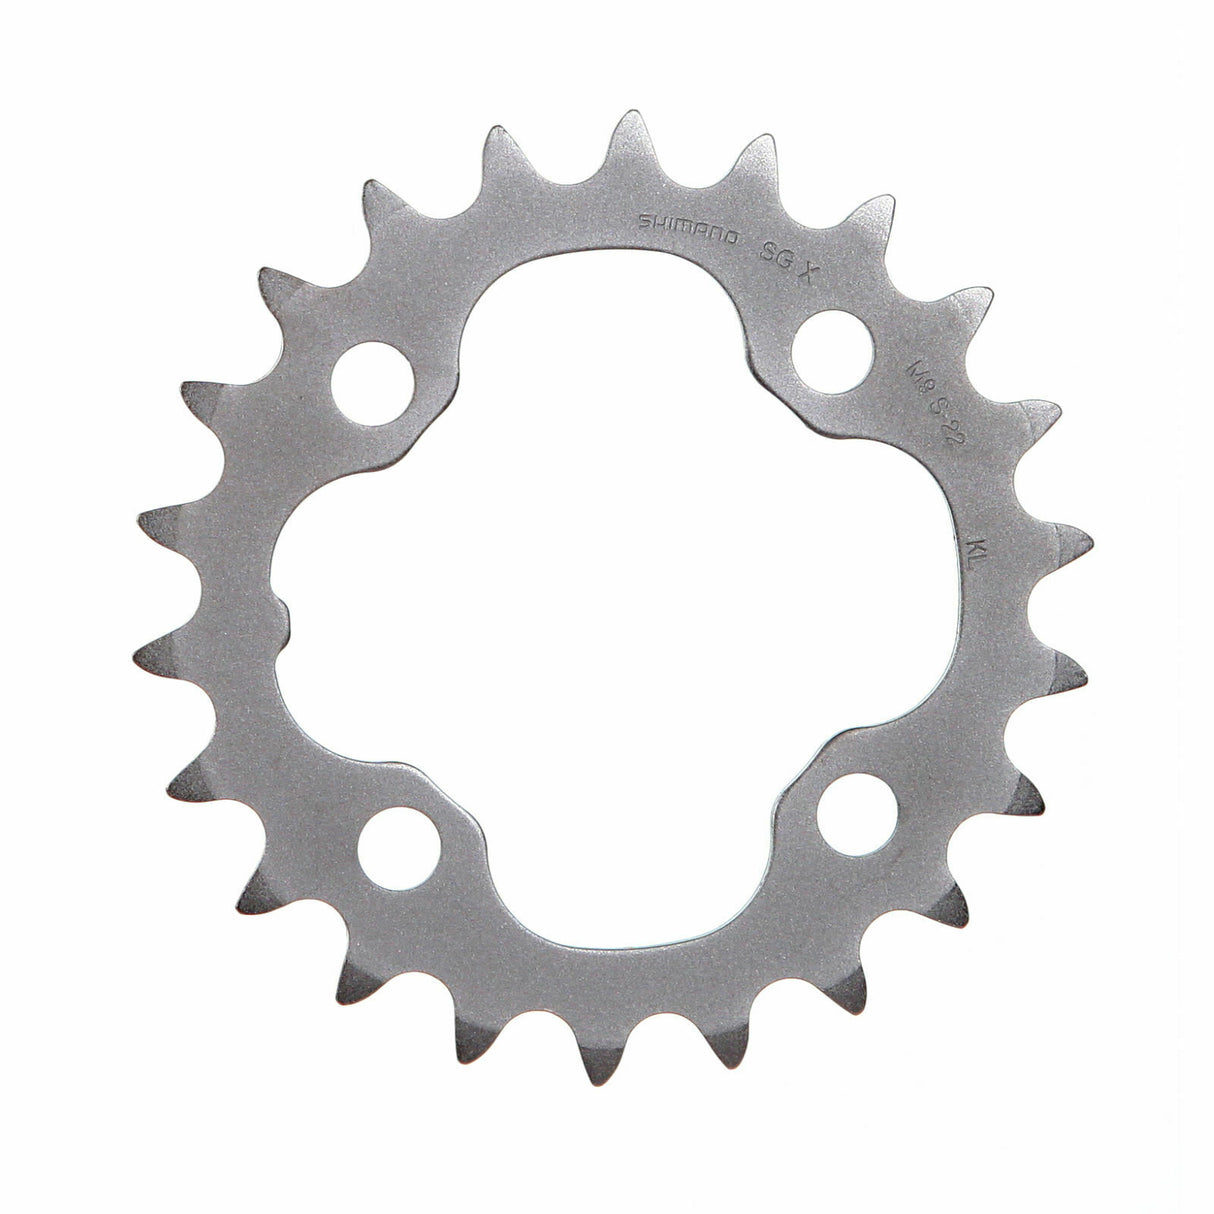 Shimano Deore FC-M532 Chainring - 22T - 64mm BCD - 3 x 9 - Silver - Sportandleisure.com (6968120311962)